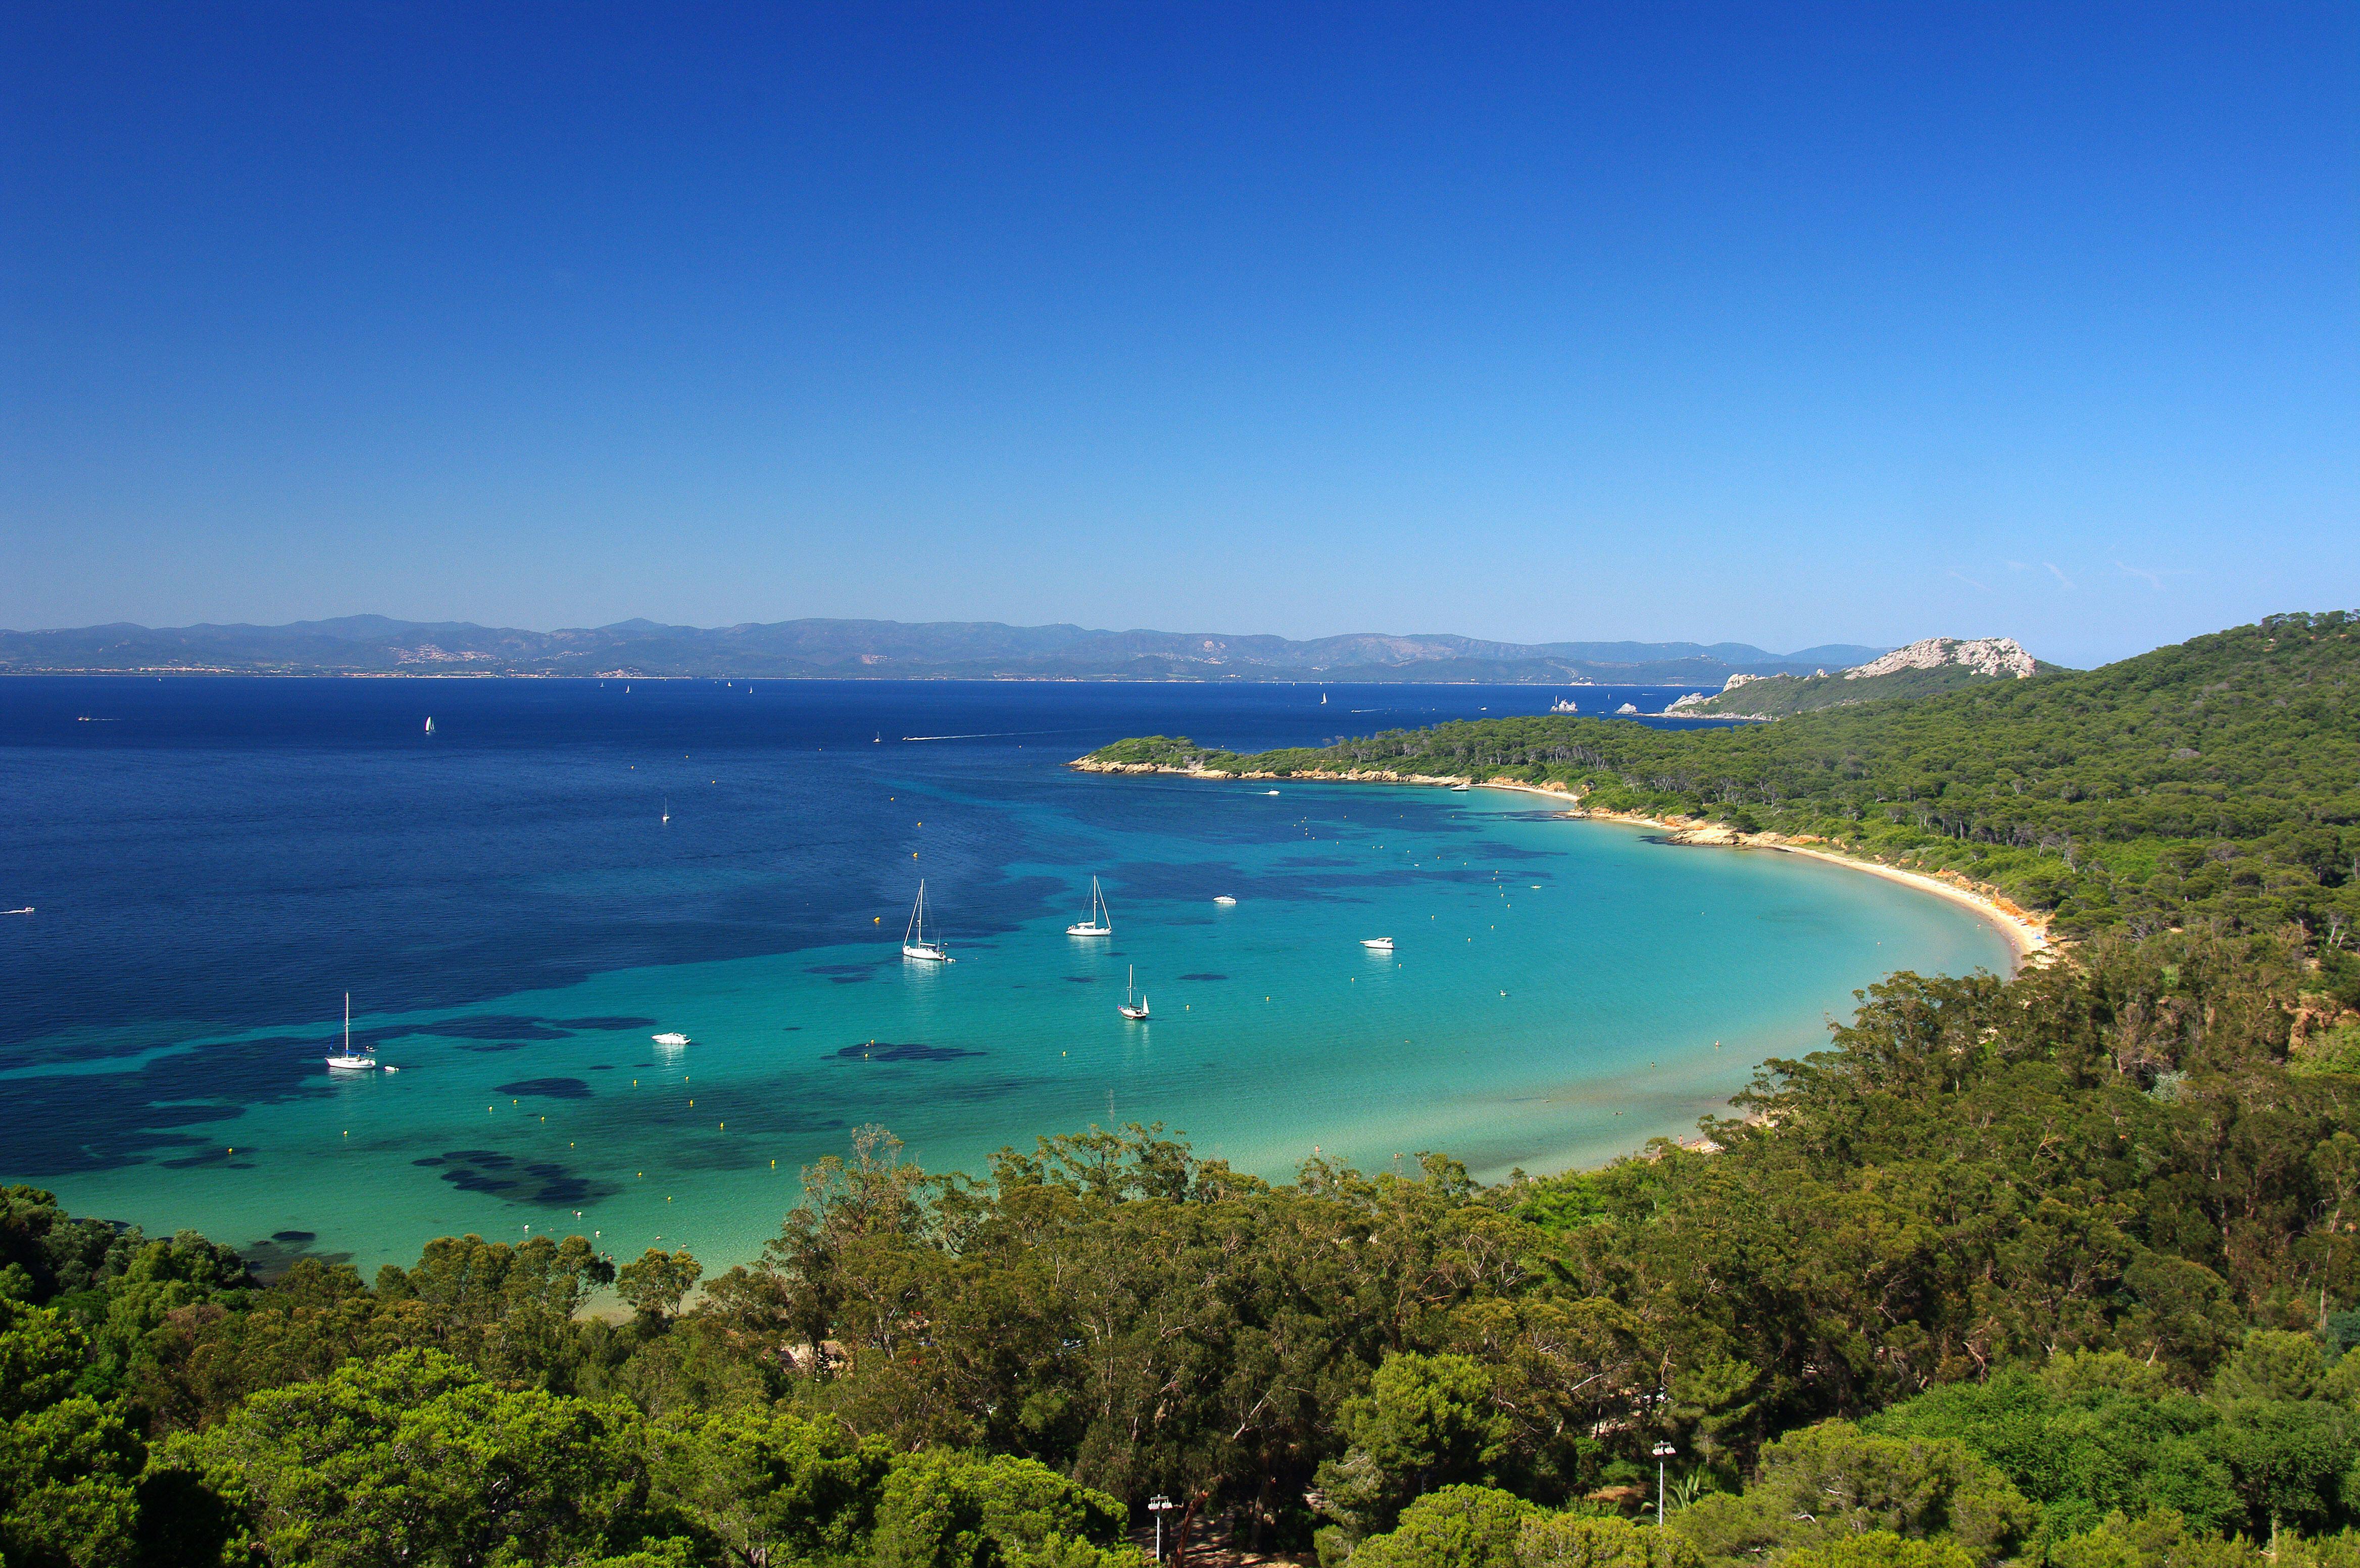 Porquerolles island is a paradisiacal destination with sandy beaches, delightful coves and unspoilt nature